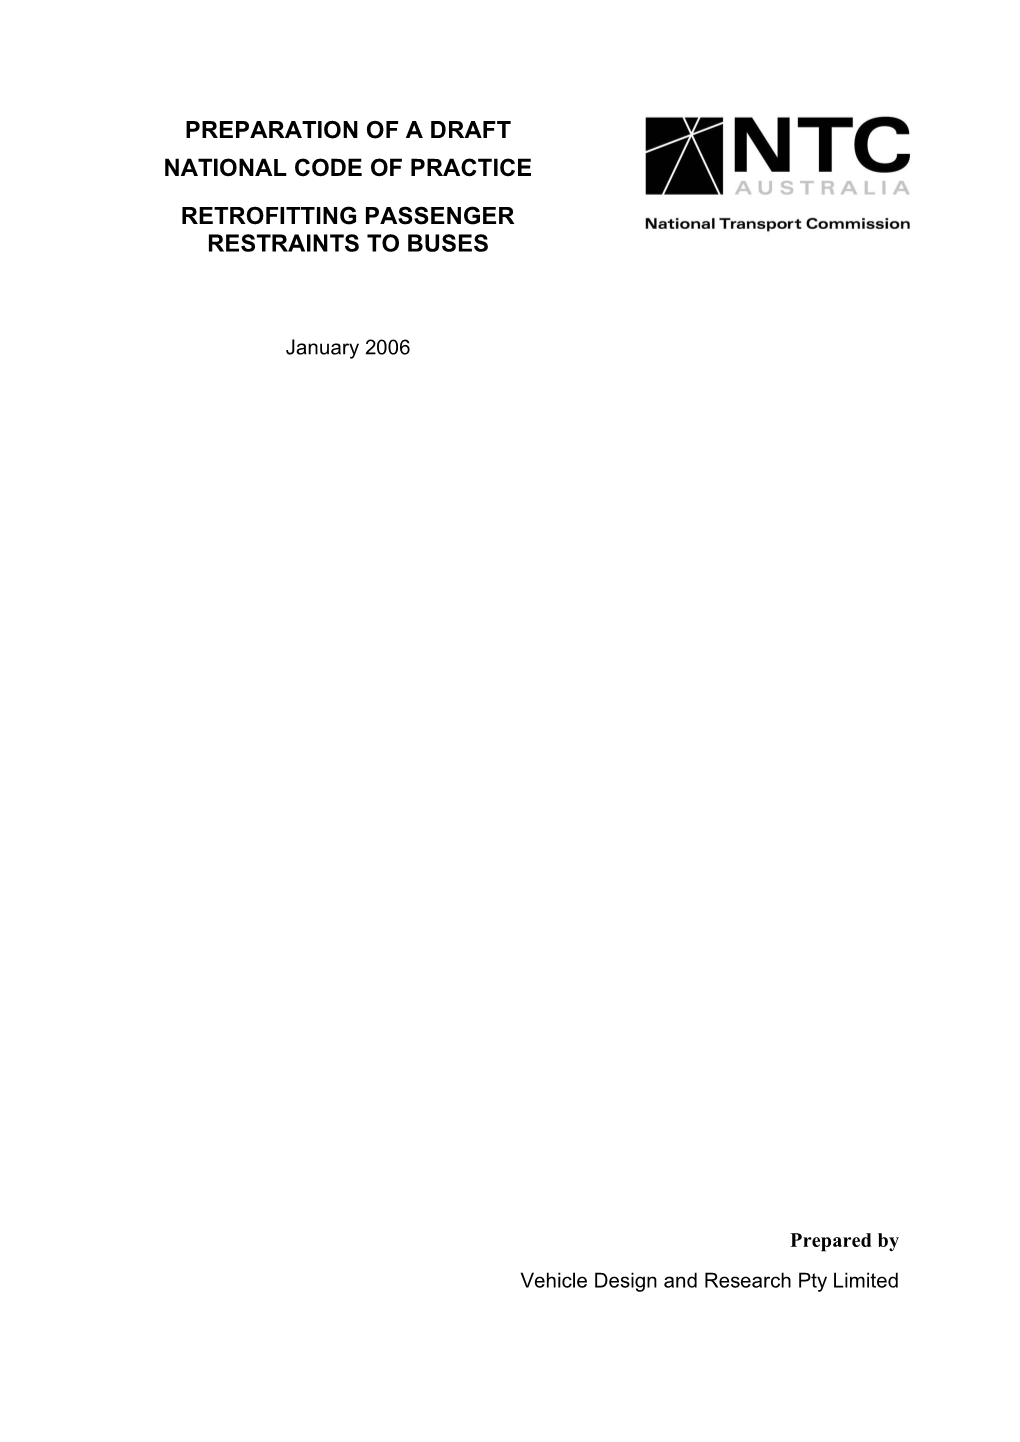 Preparation of a Draft National Code of Practice Retrofitting Passenger Restraints to Buses